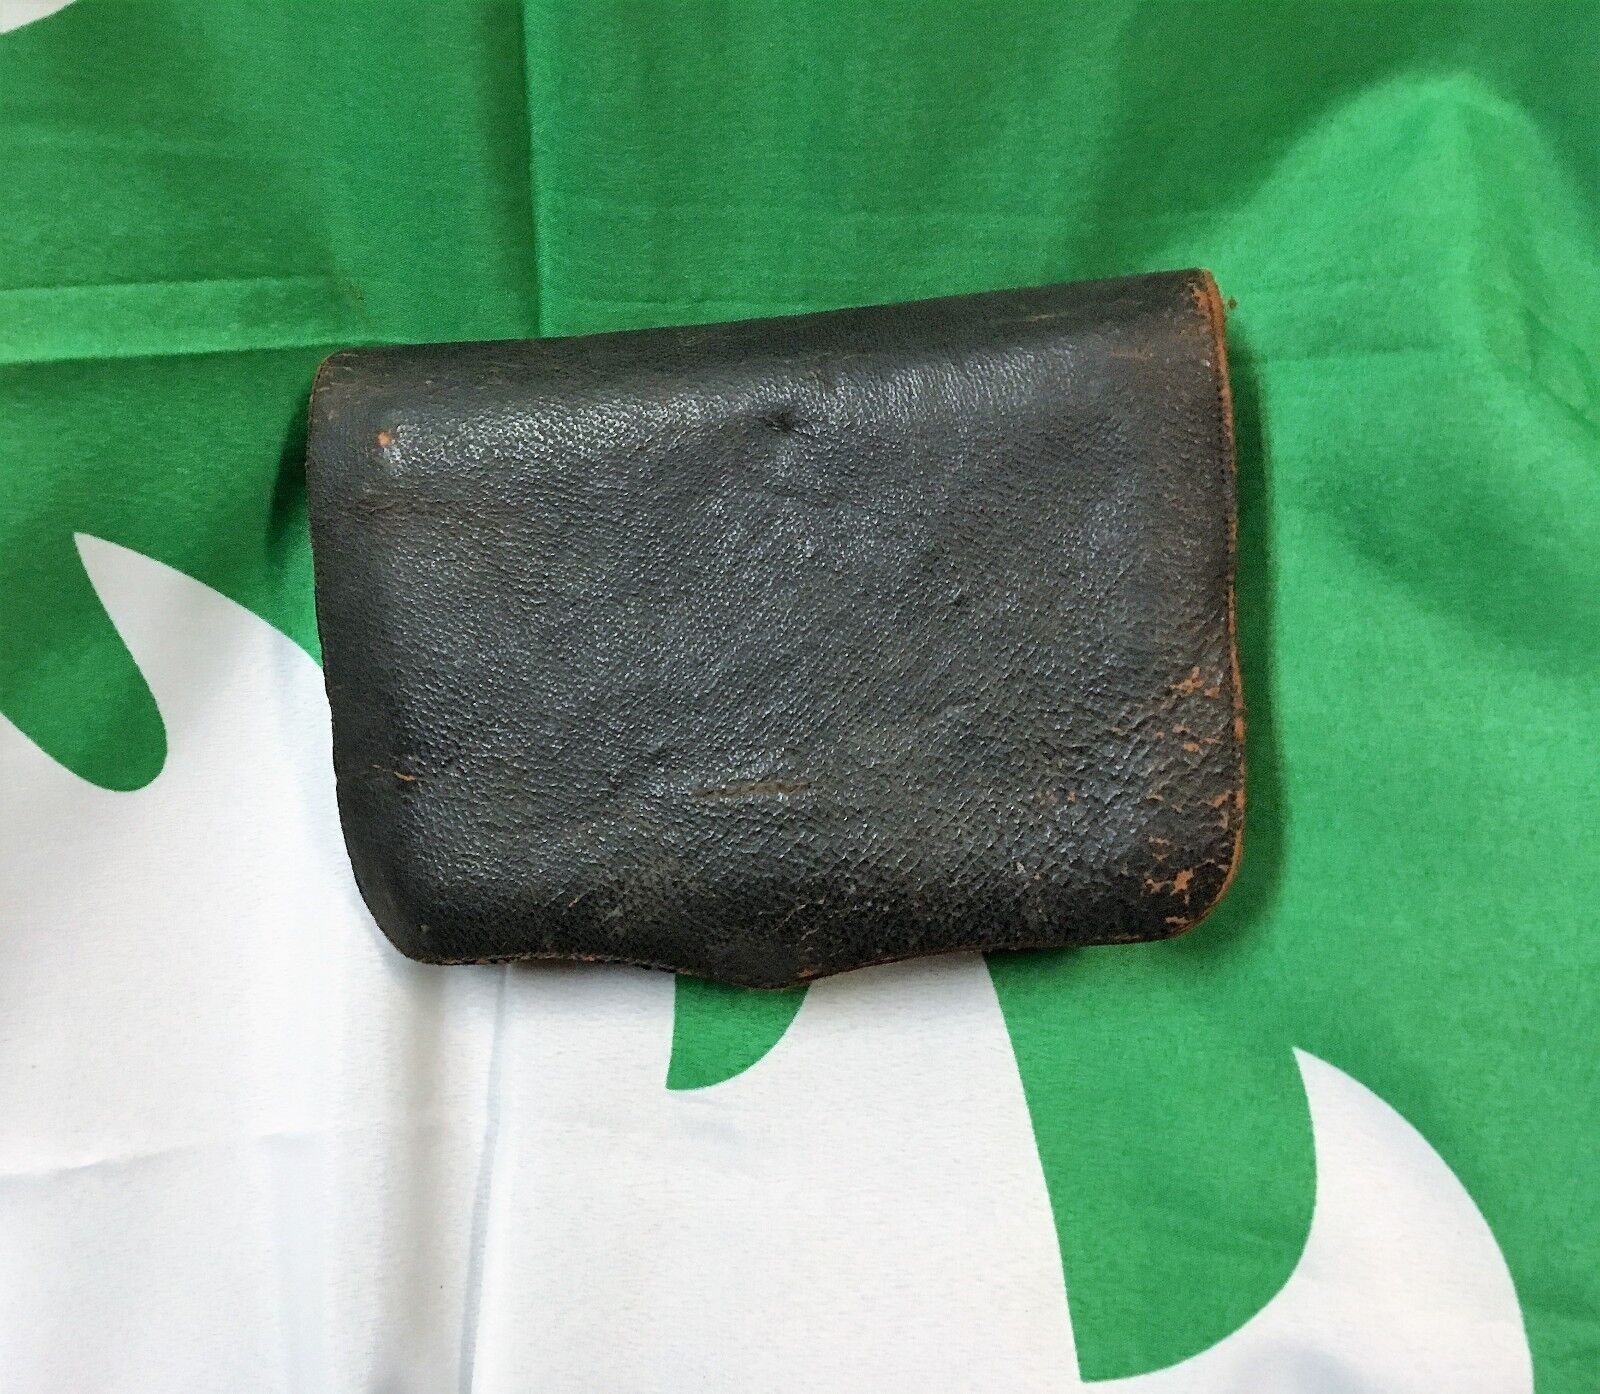  cartridge pouch, Civil War, unmarked leather, with interior tin